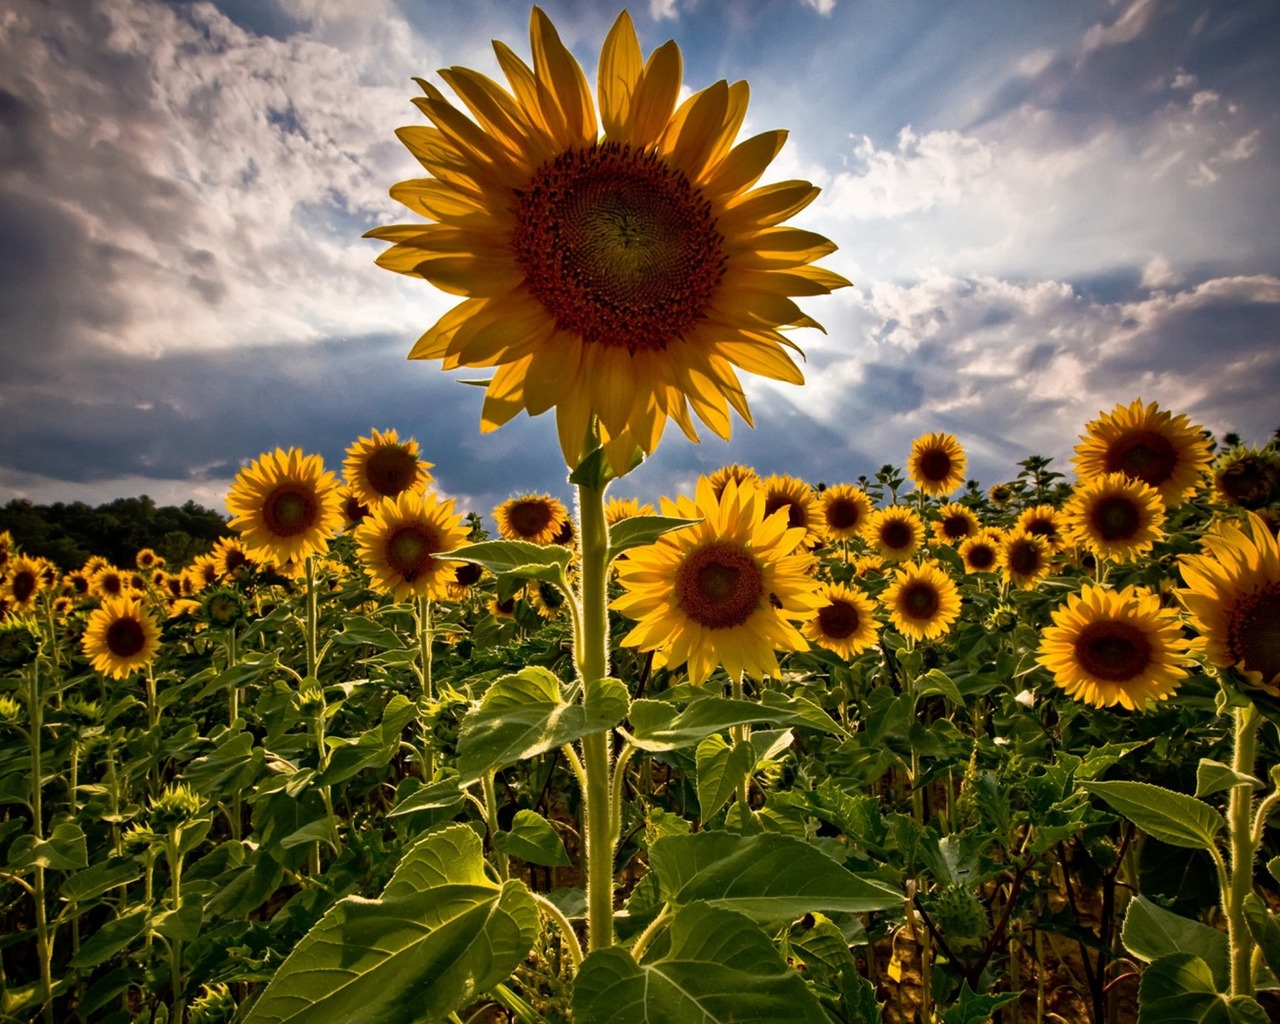 HDR Sunflower for 1280 x 1024 resolution